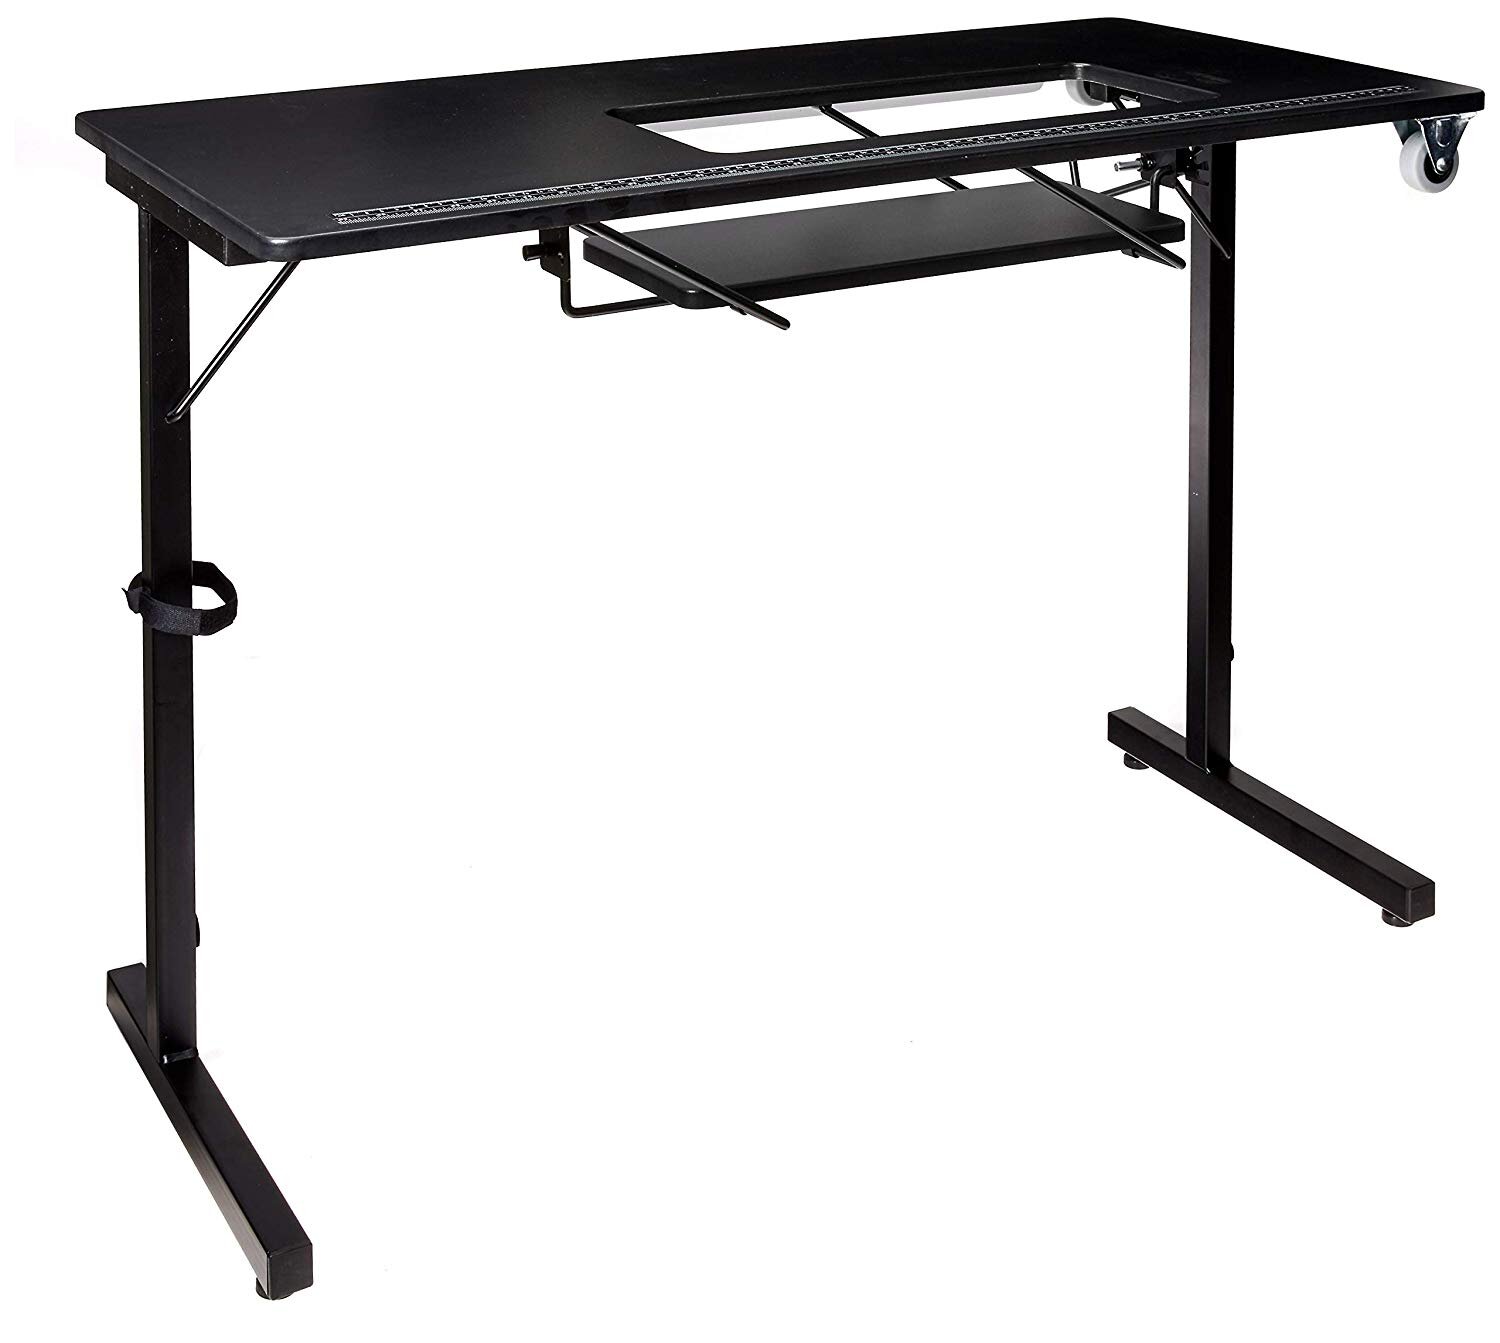 EROMMY 58 x 36 Height Adjustable Foldable Craft Table with Wheels & Reviews